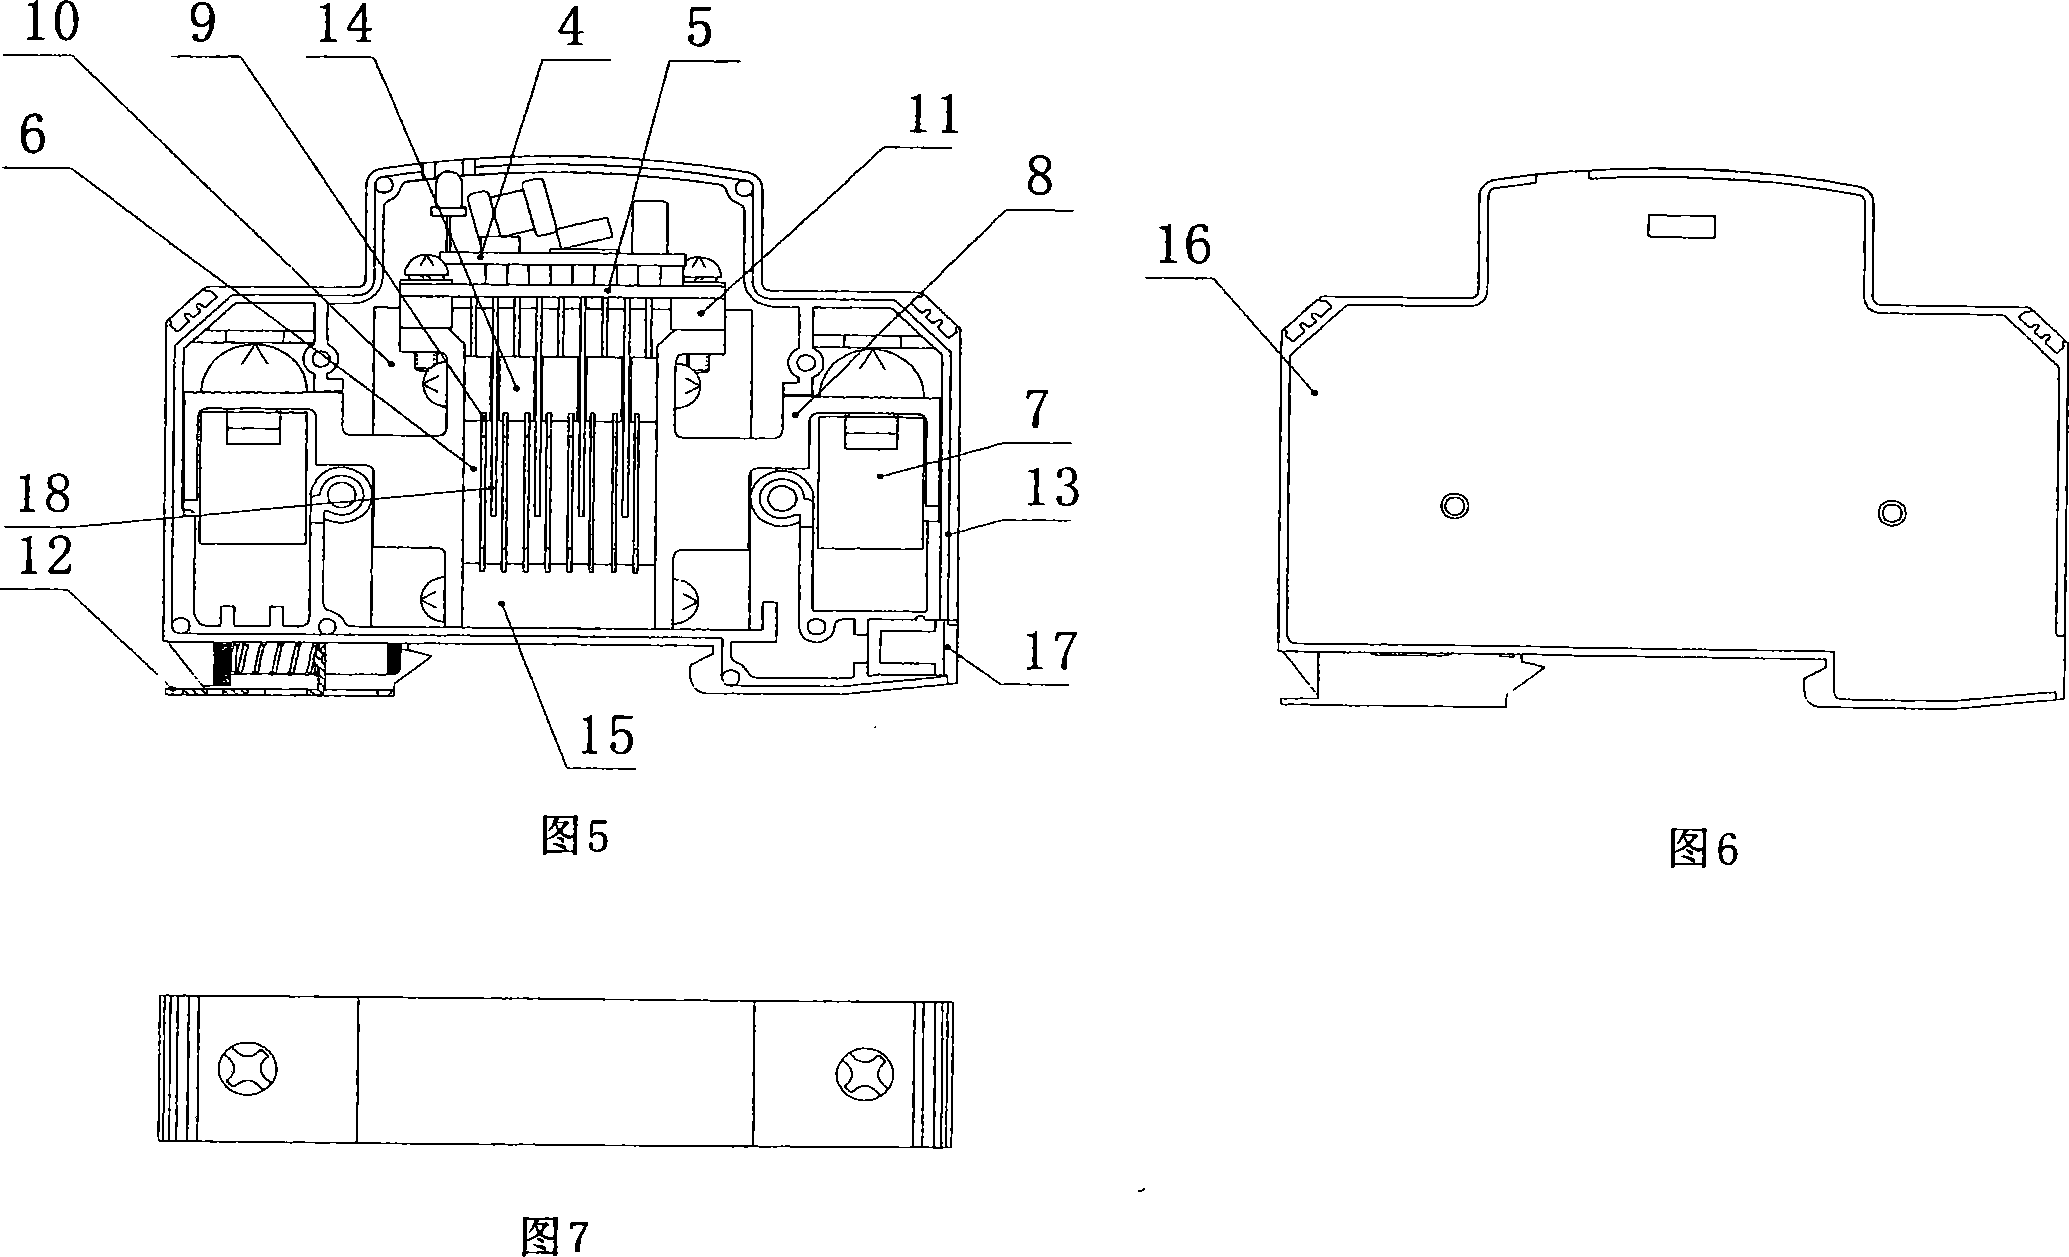 High efficient laminated graphic discharge gap device